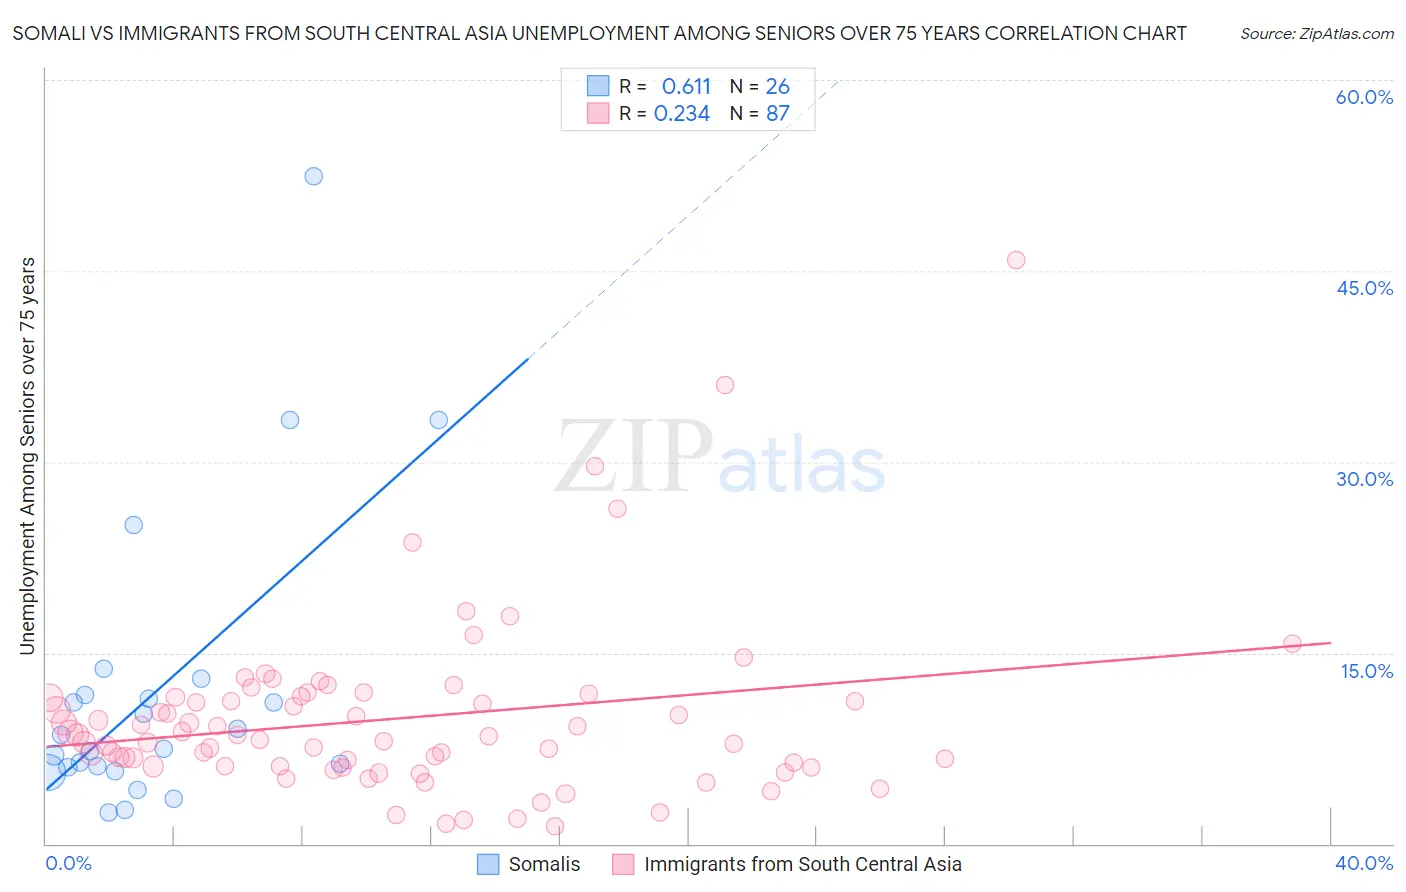 Somali vs Immigrants from South Central Asia Unemployment Among Seniors over 75 years